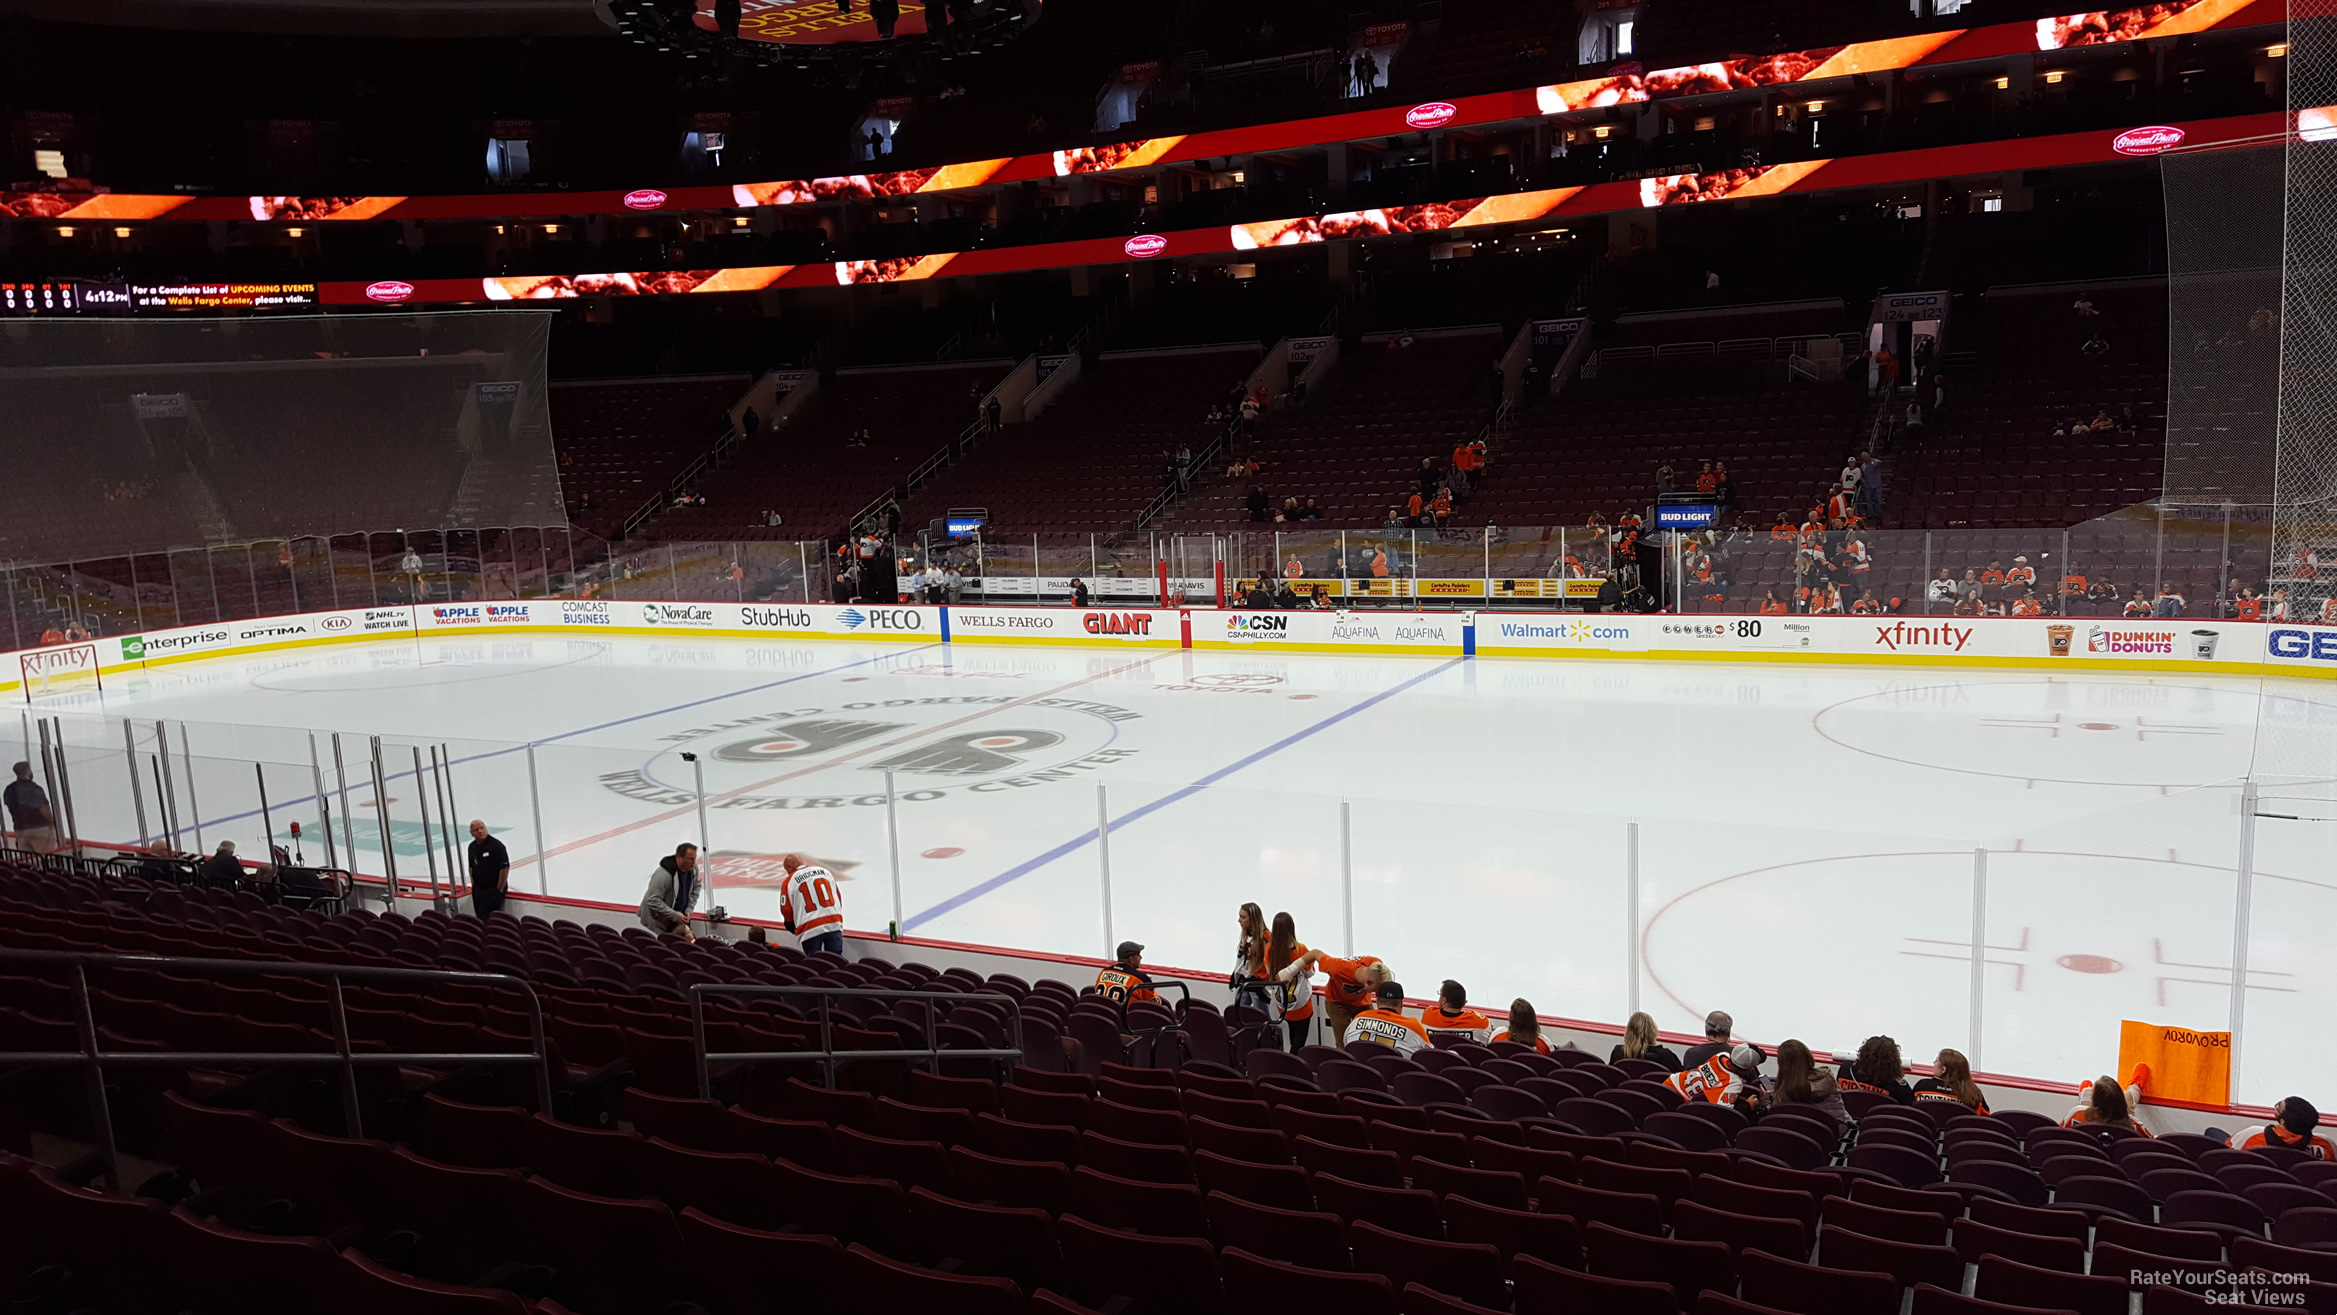 section 115, row 17 seat view  for hockey - wells fargo center